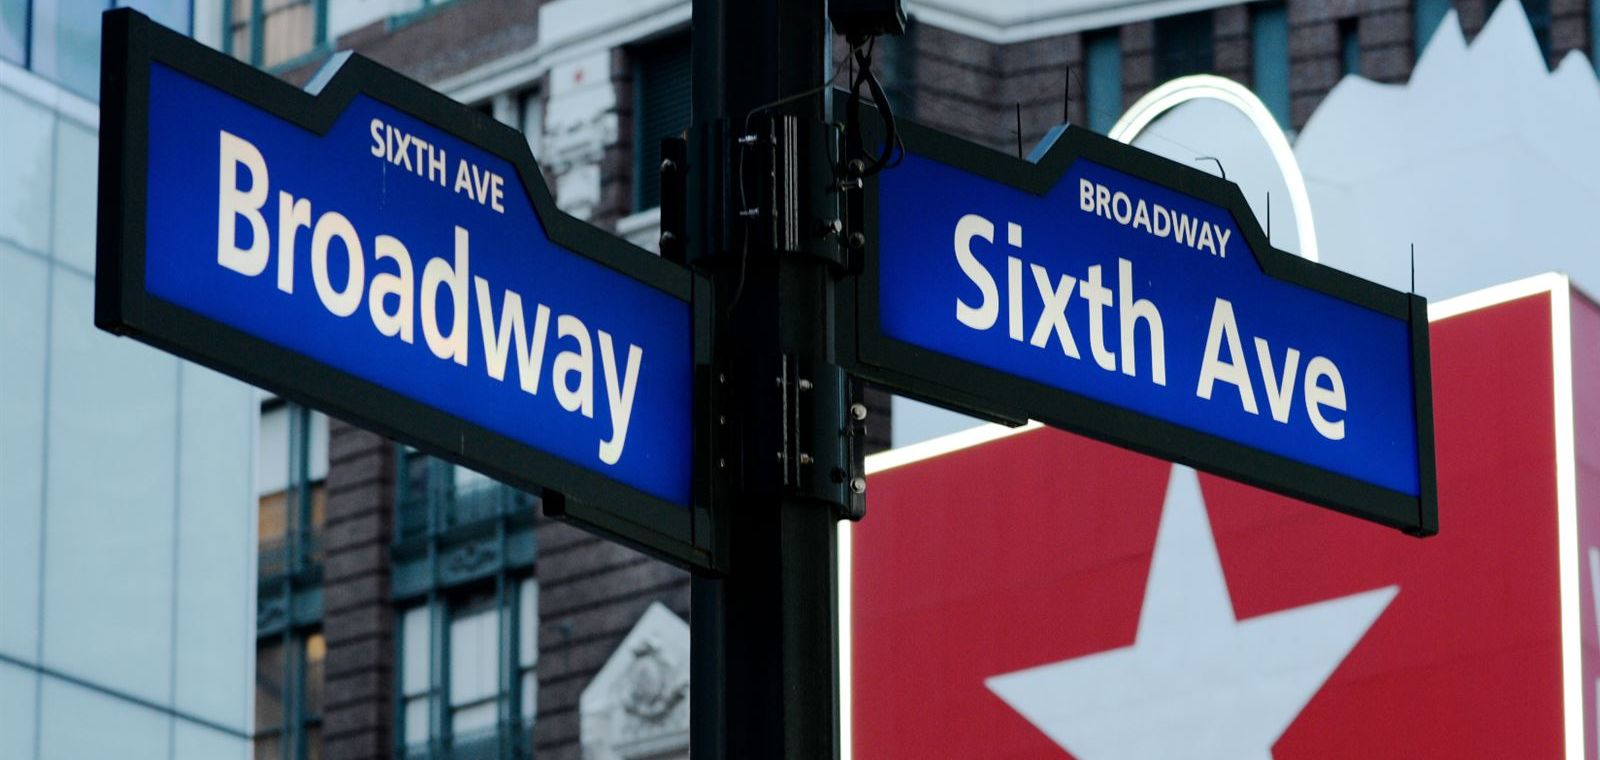 Street Signs For Broadway And Sixth Avenue